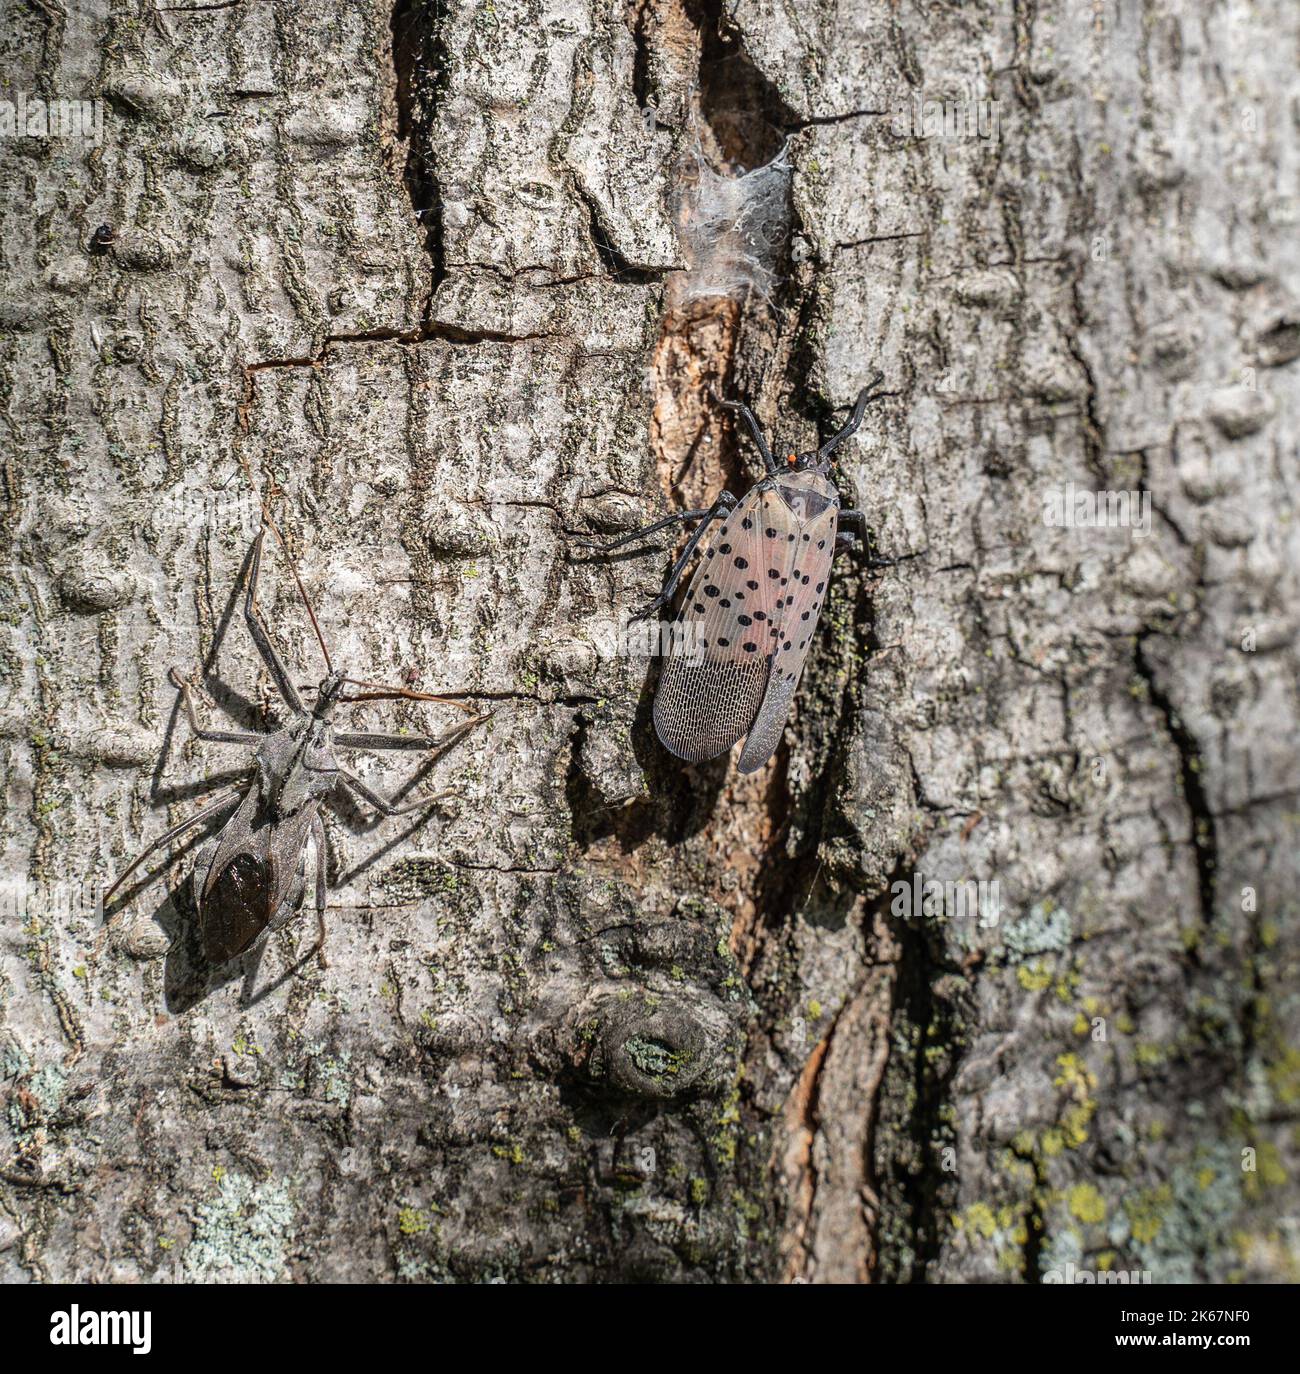 Spotted Lanternfly (Lycorma delicatula) and Assassin bug or wheel bug (Arilus cristatus) on tree. Assassin bugs have been seen preying on lantern flies. Stock Photo